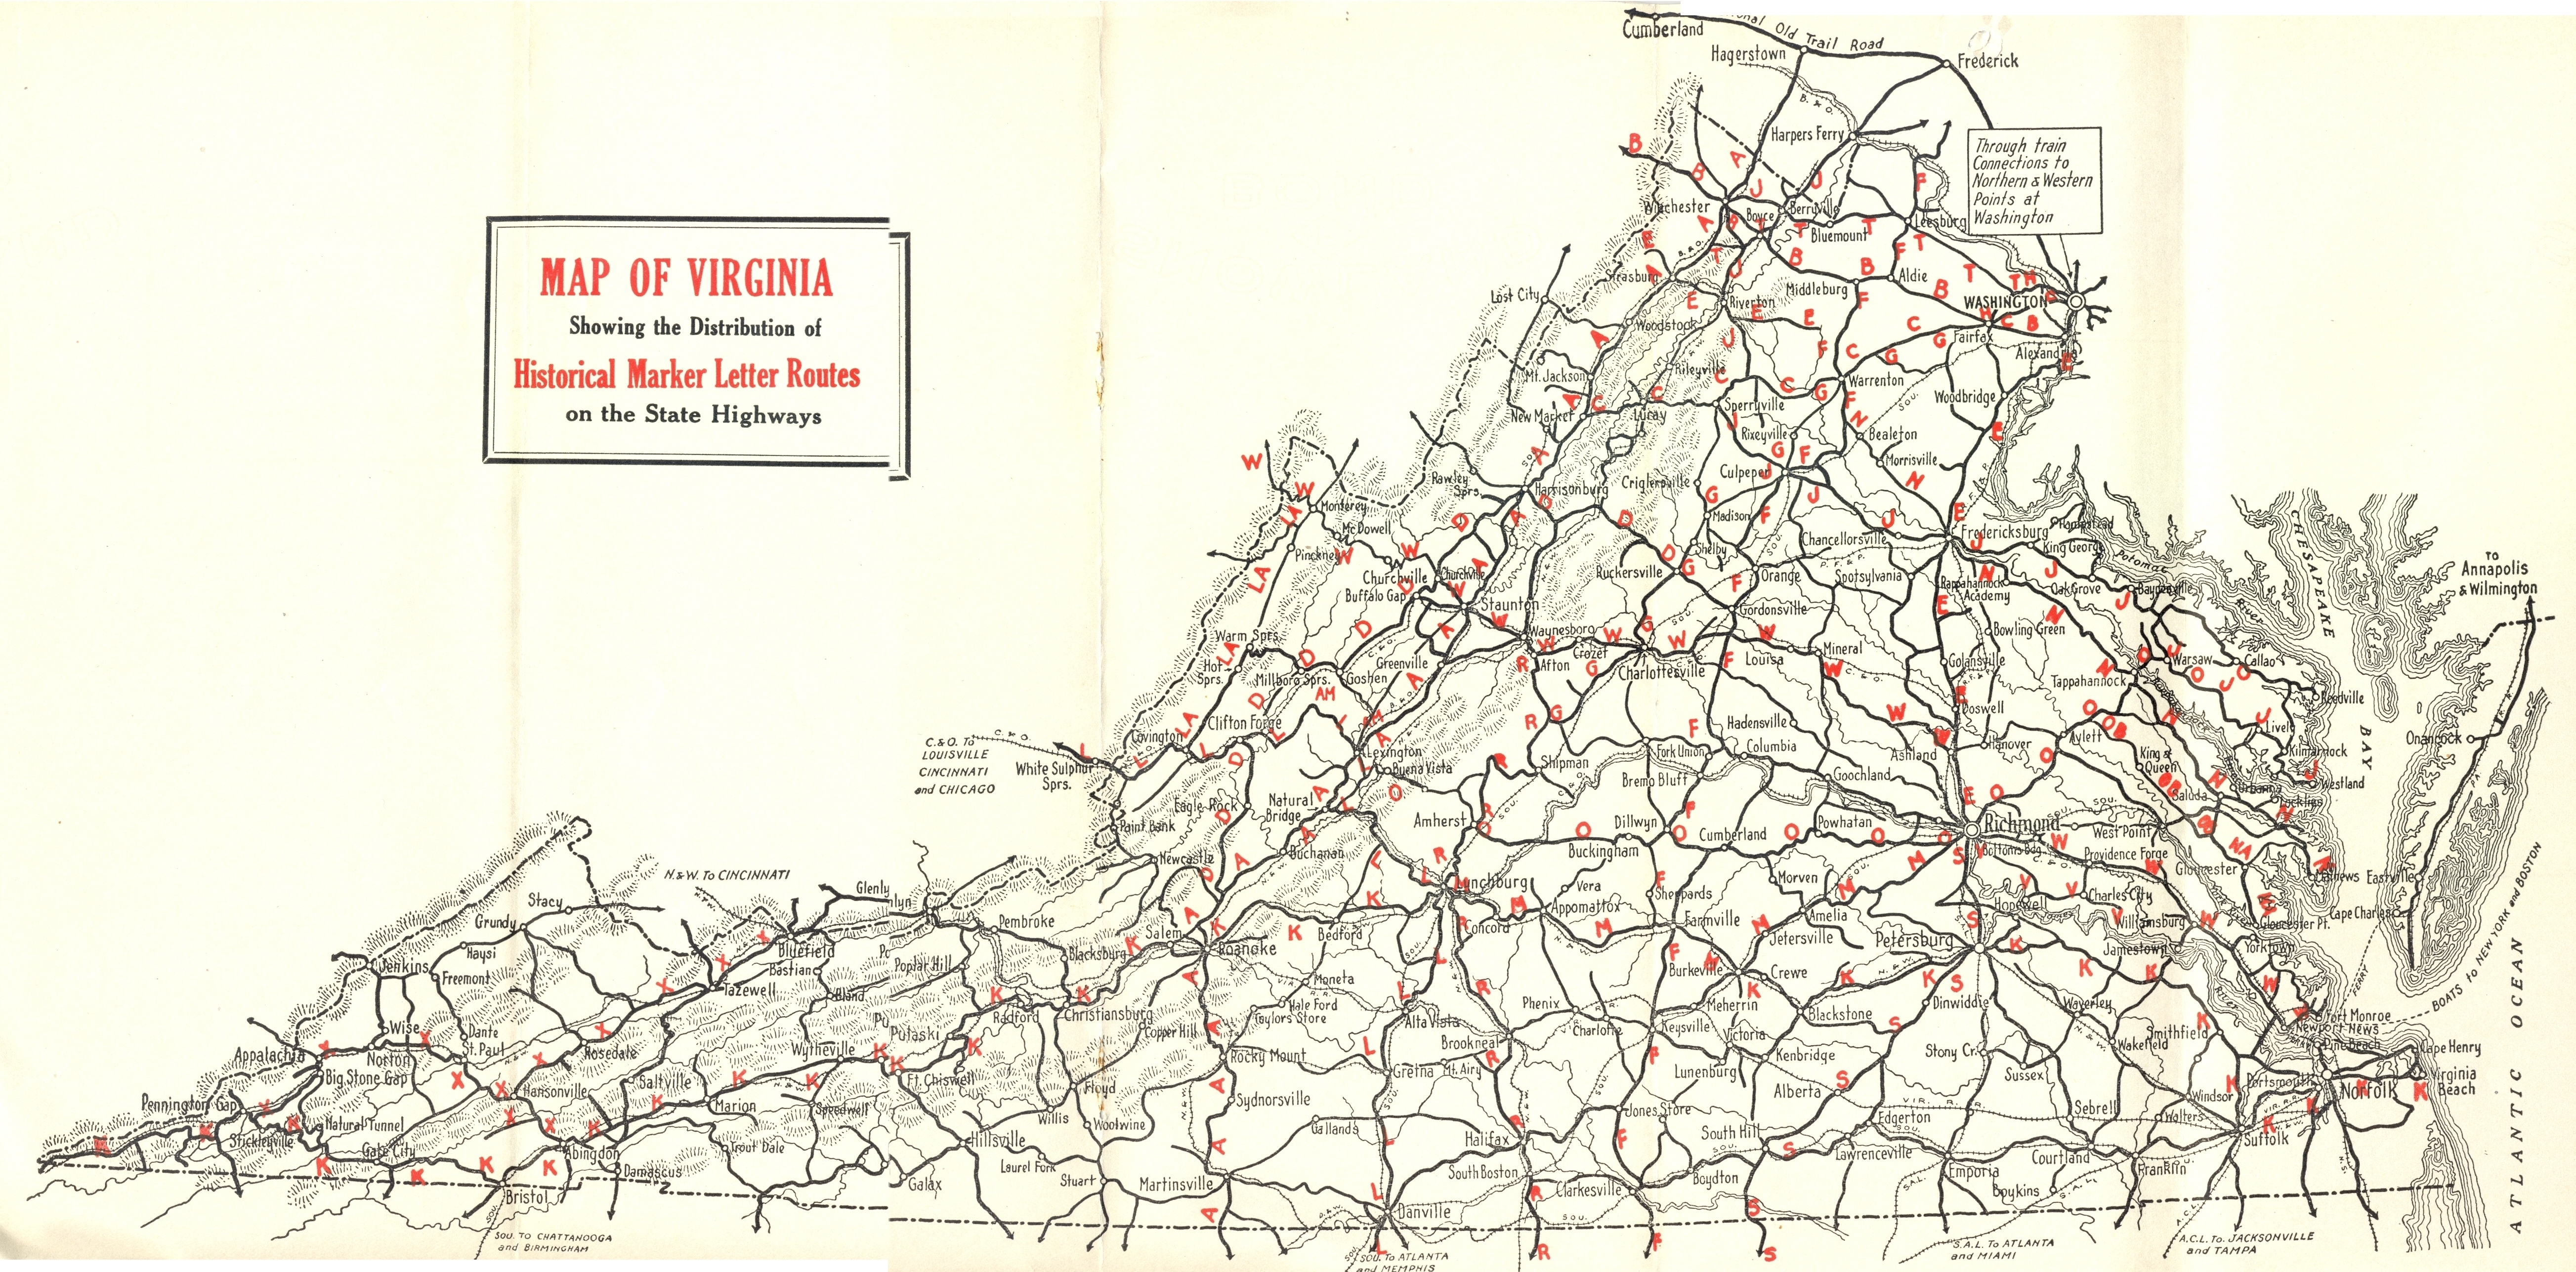 1929 Virginia Historical Marker Letter Routes